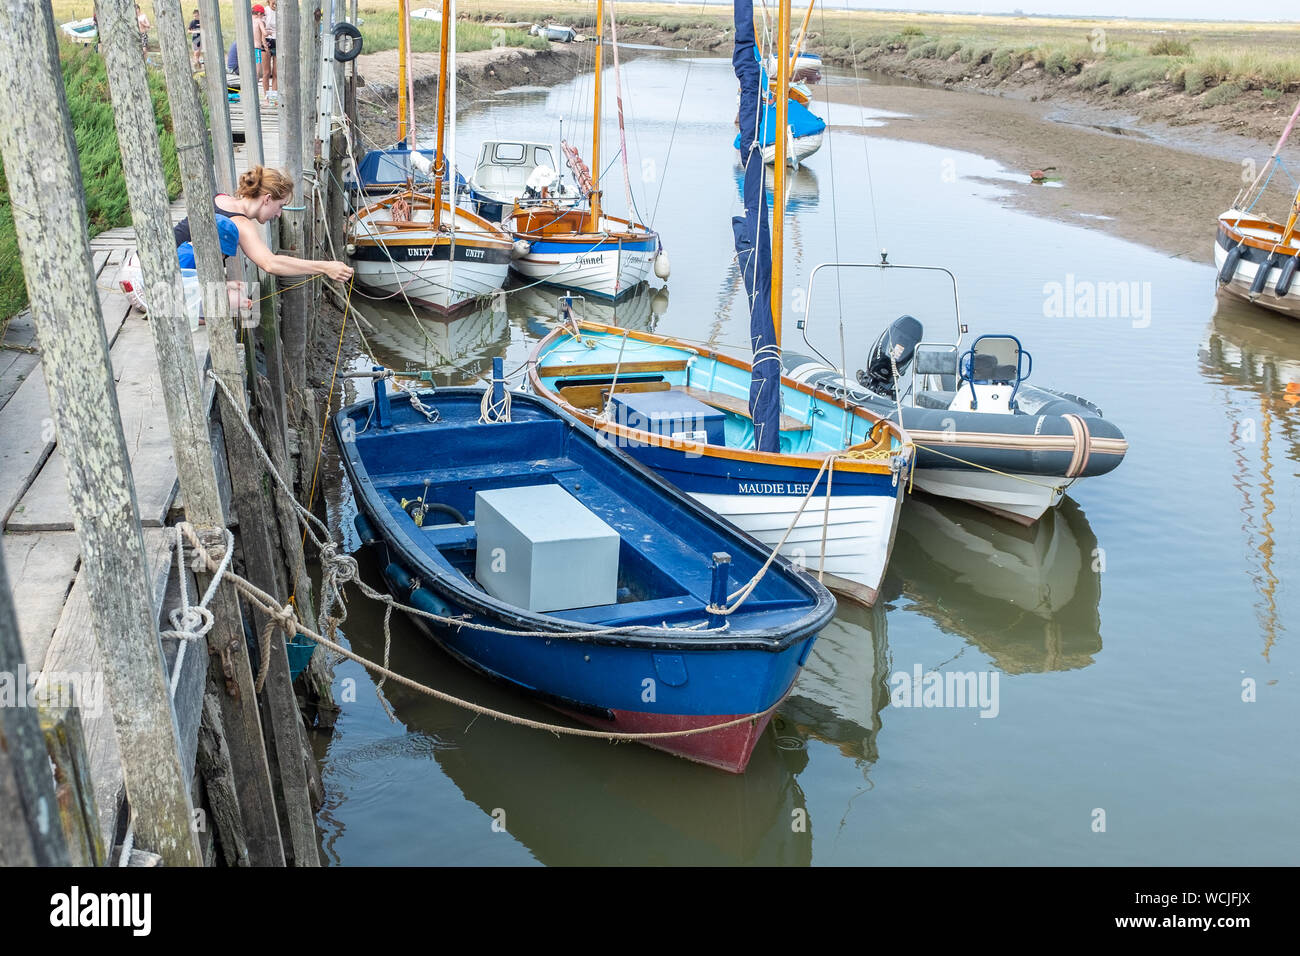 People crabbing on quayside, River Glaven, Blakeney, Norfolk alongside moored small boats Stock Photo